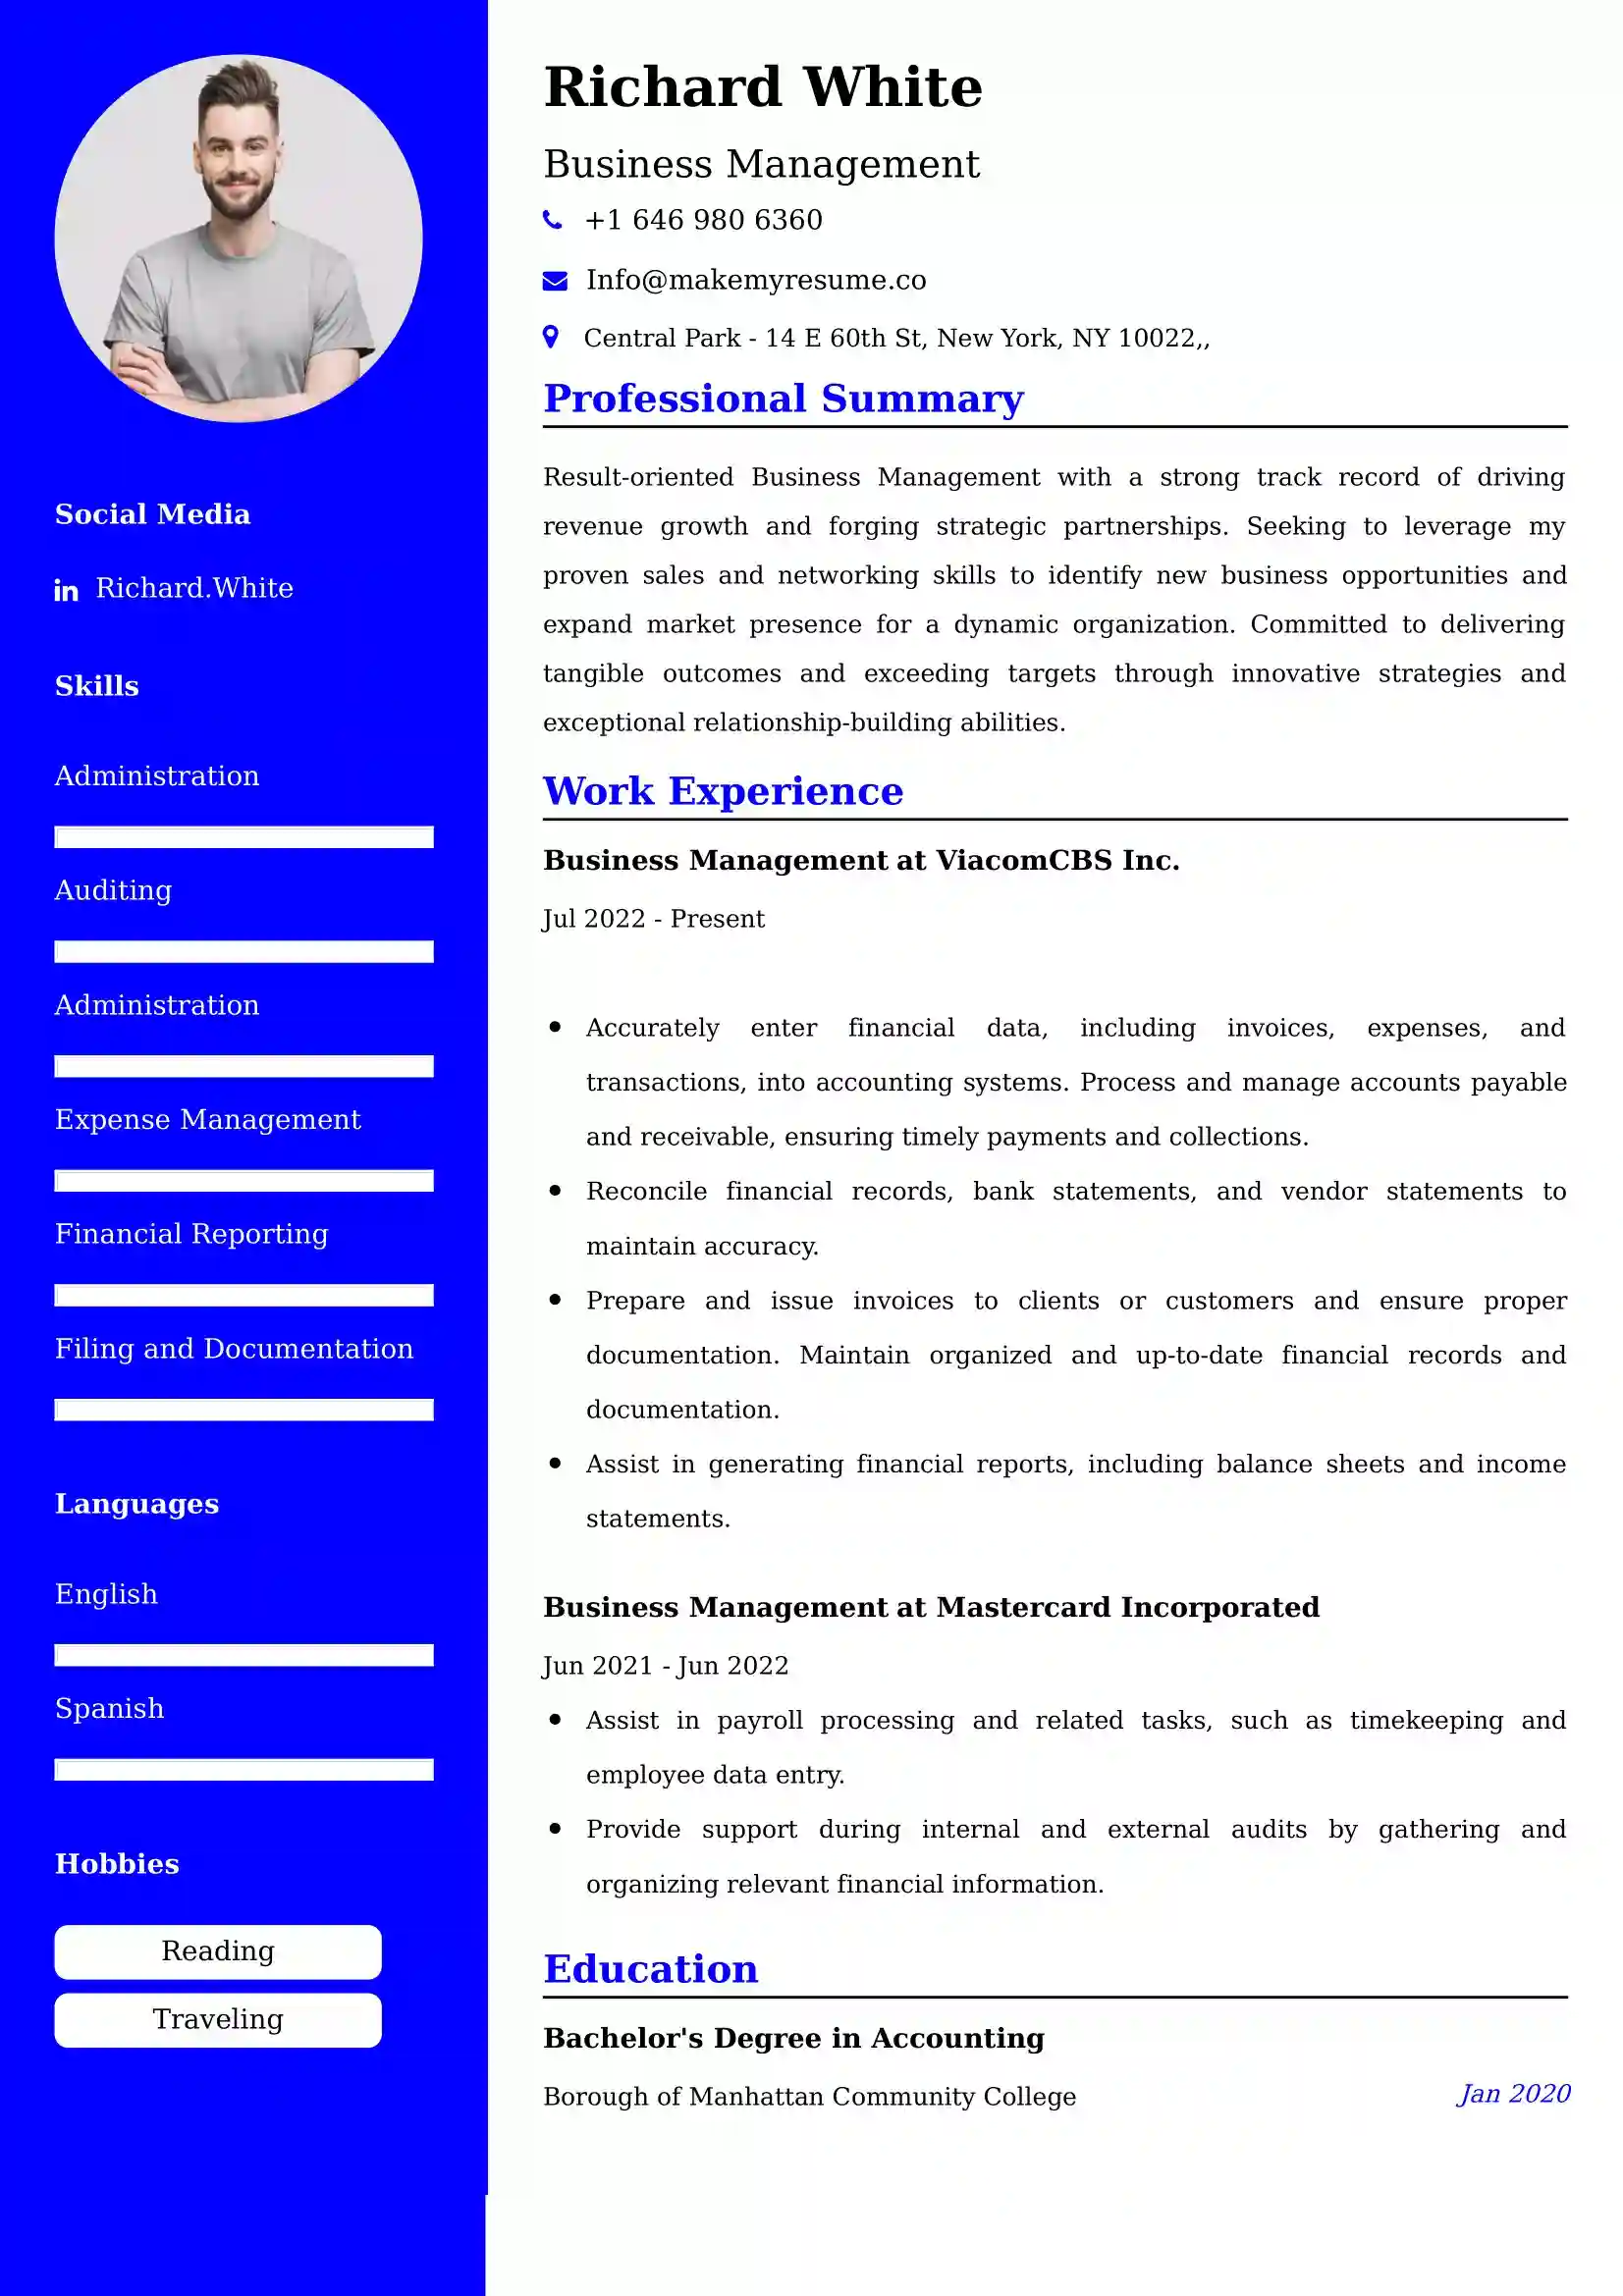 Business Management CV Examples Malaysia